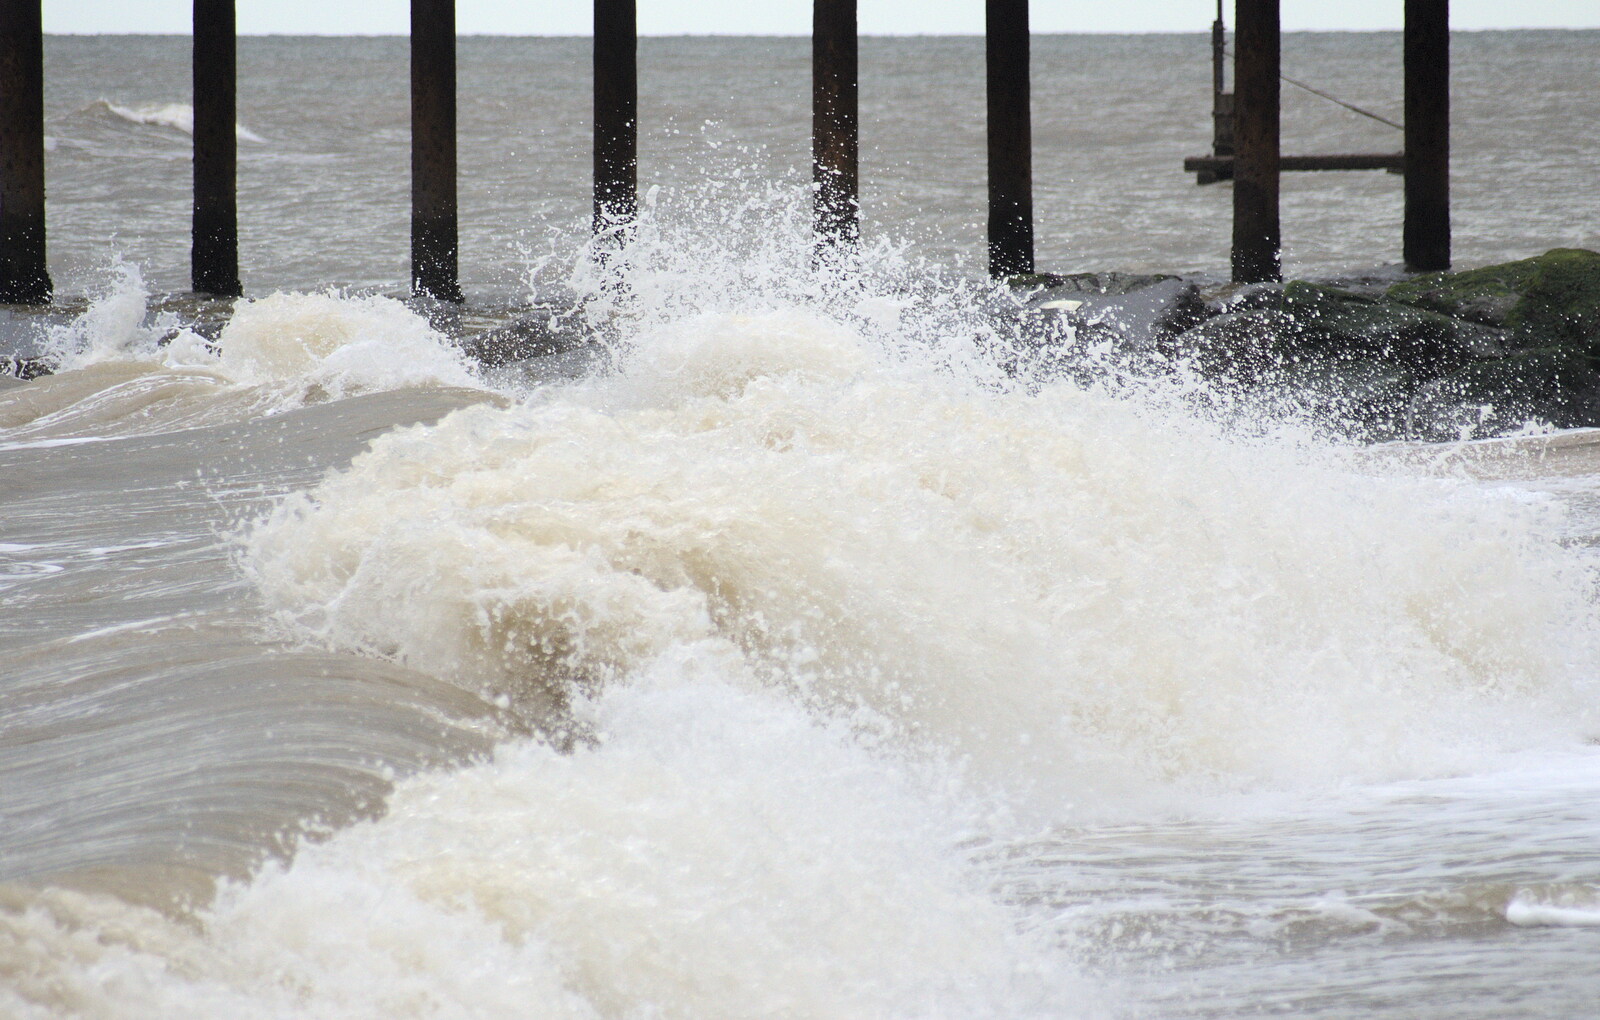 Seas thrash around near the pier from A Night at the Crown Hotel, Southwold, Suffolk - 13th June 2012